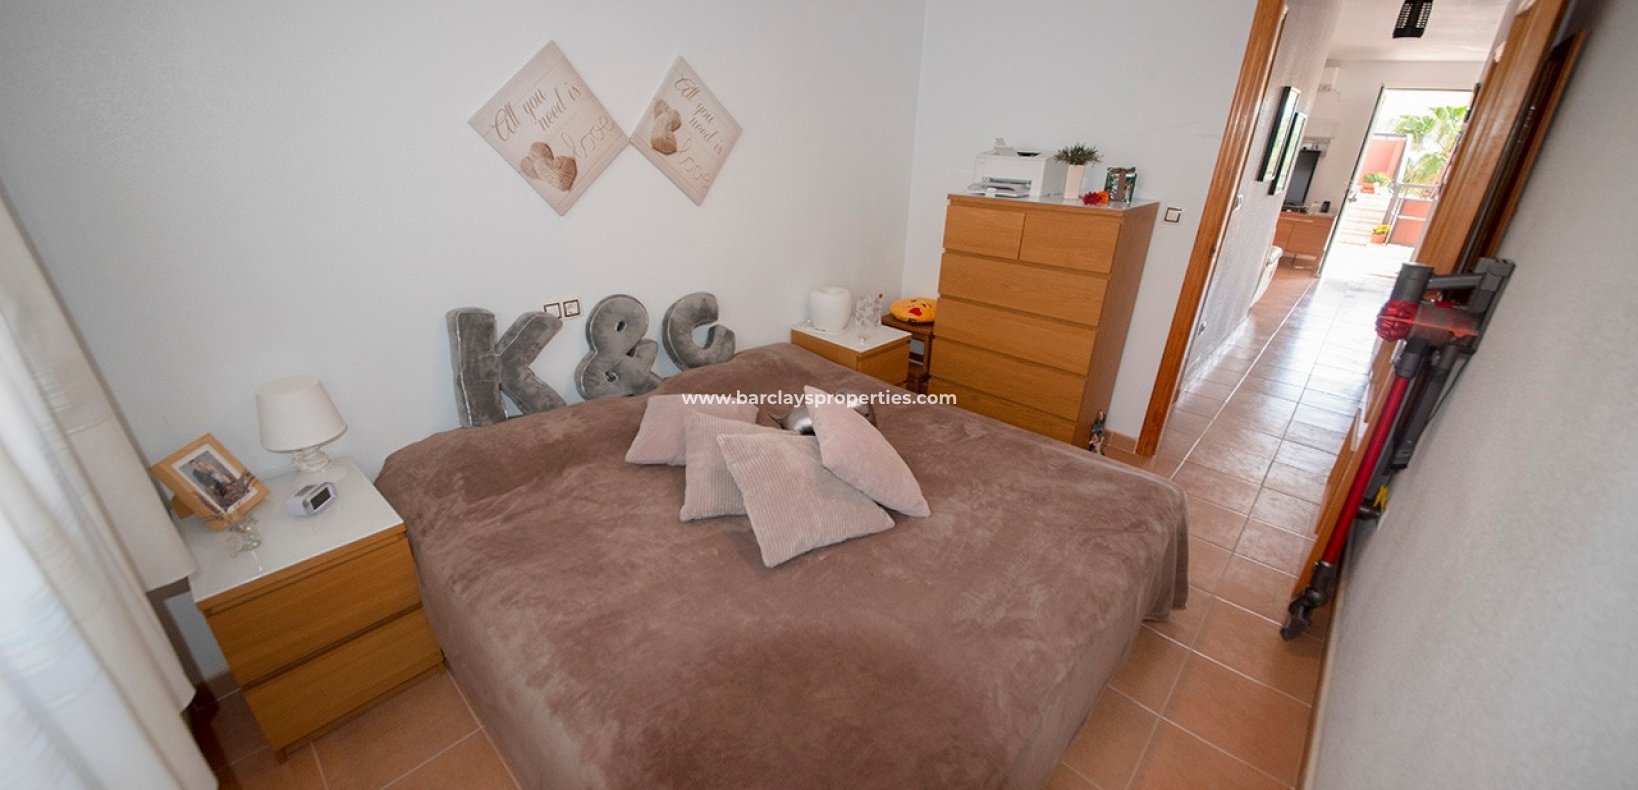 Town House Style Property for Sale in La Marina, Alicante Spain. - bedroom